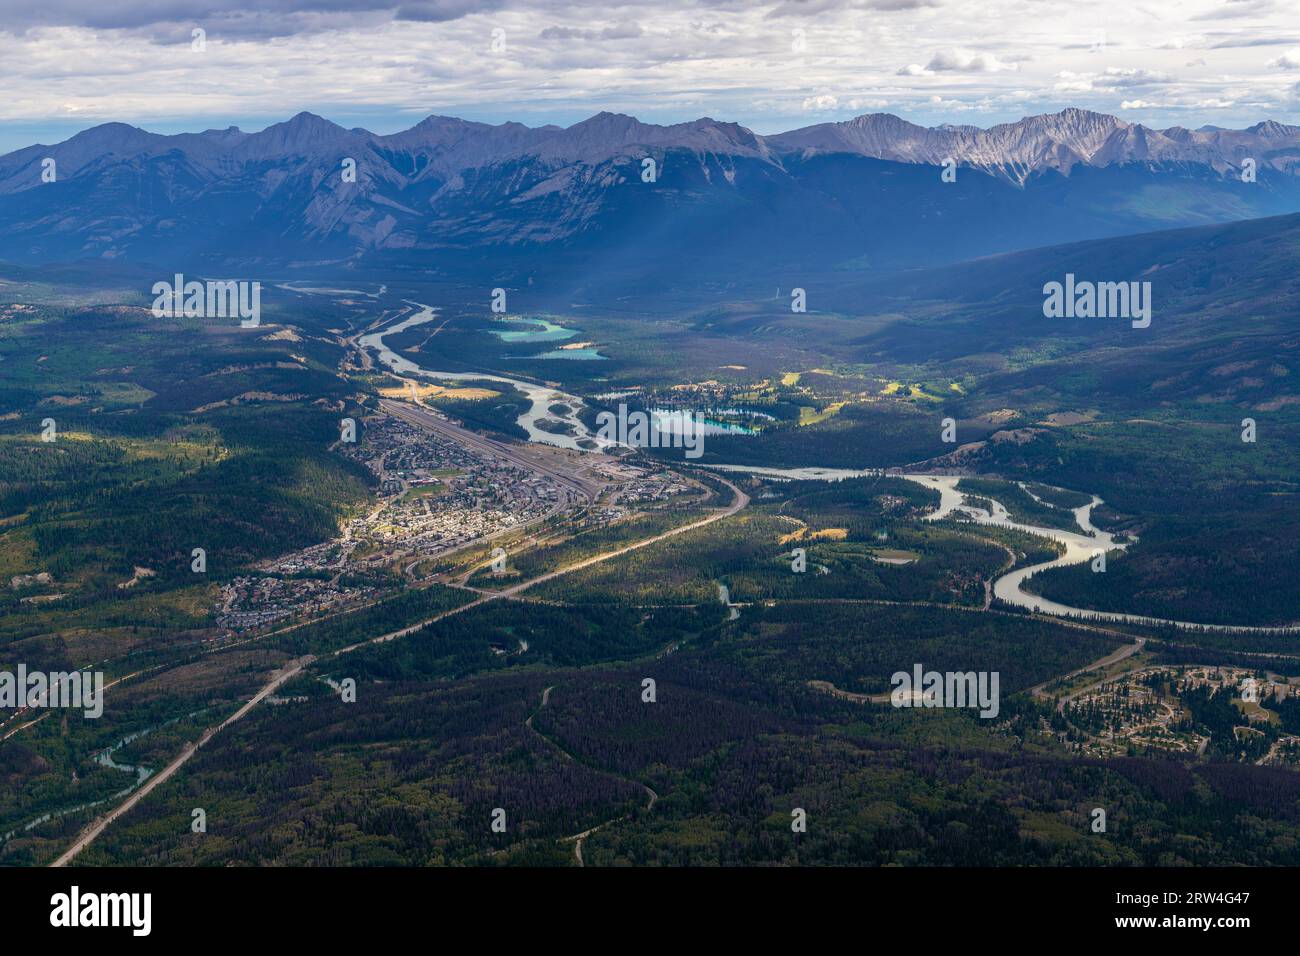 Aerial view of Jasper town and Athabasca river from Whistlers Mountain, Jasper national park, Canada. Stock Photo